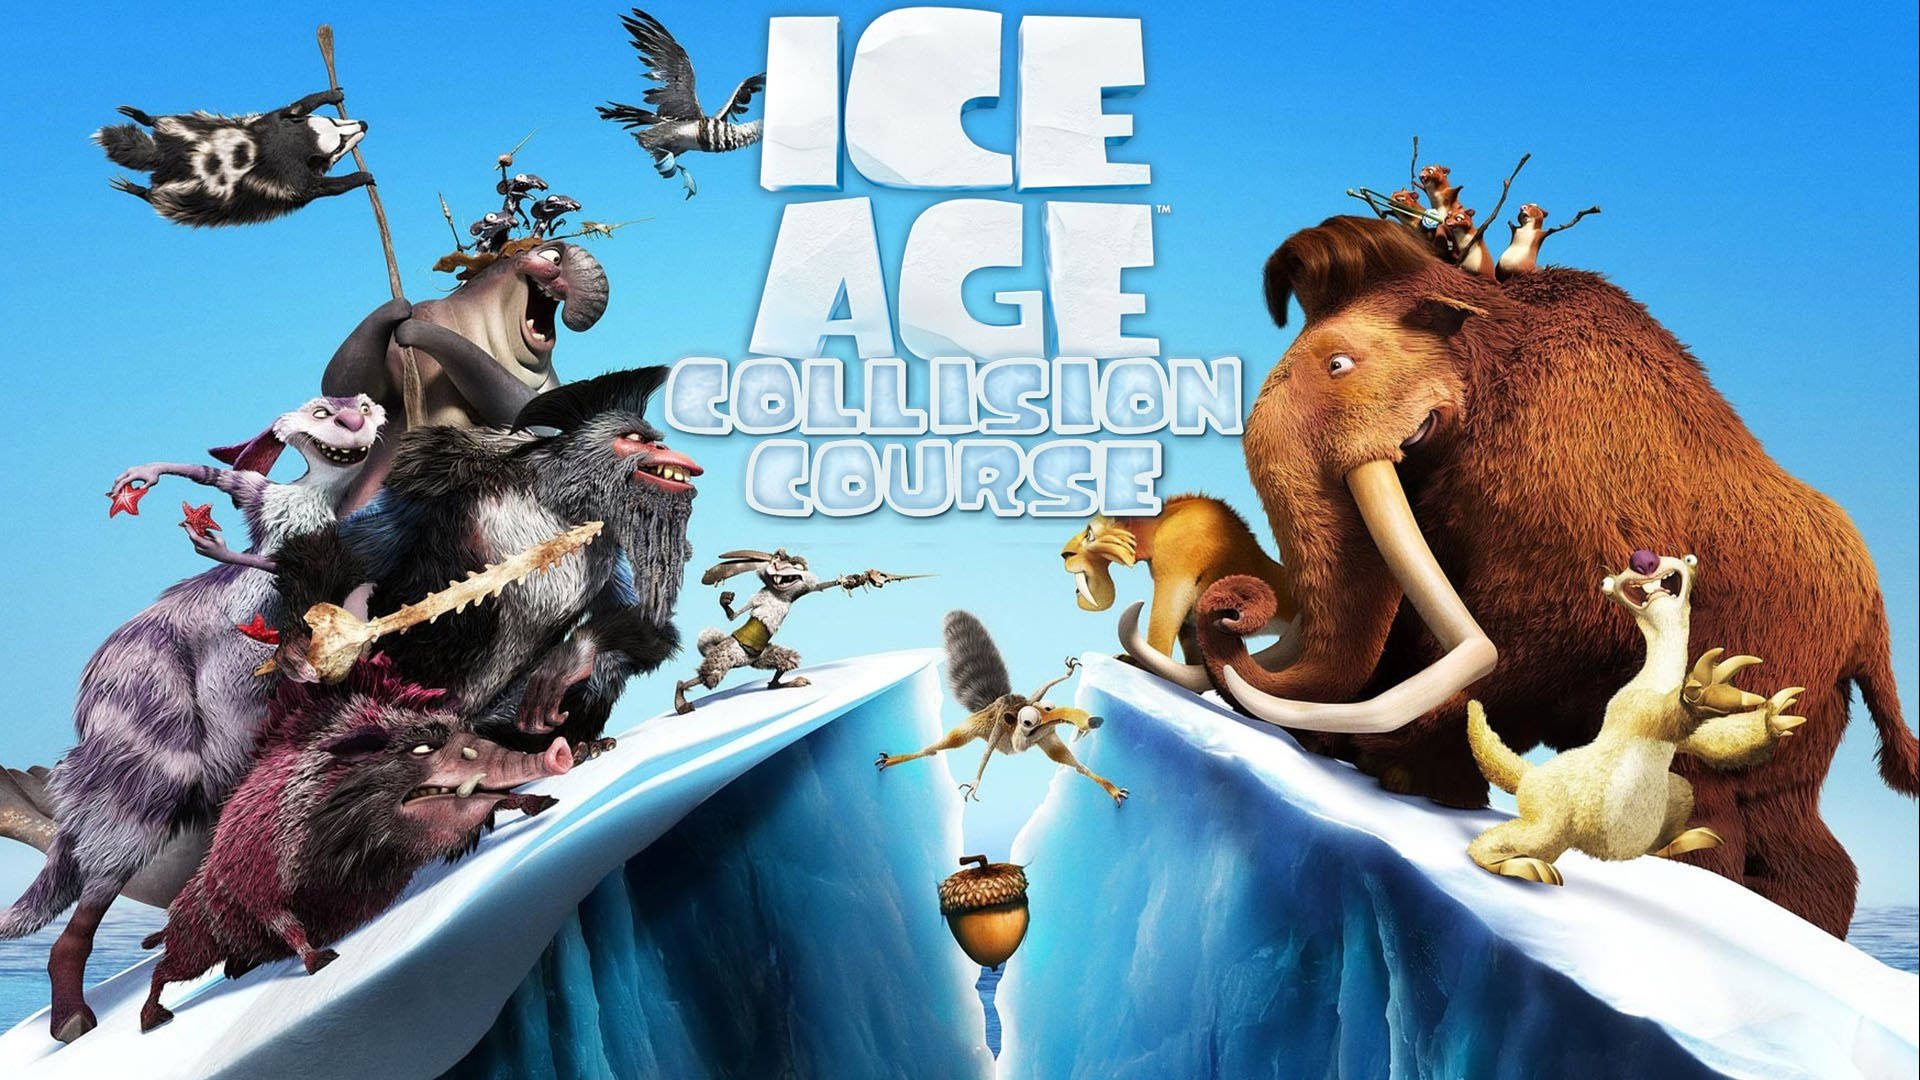 Ice Age Collision Course Movie Poster Wallpaper